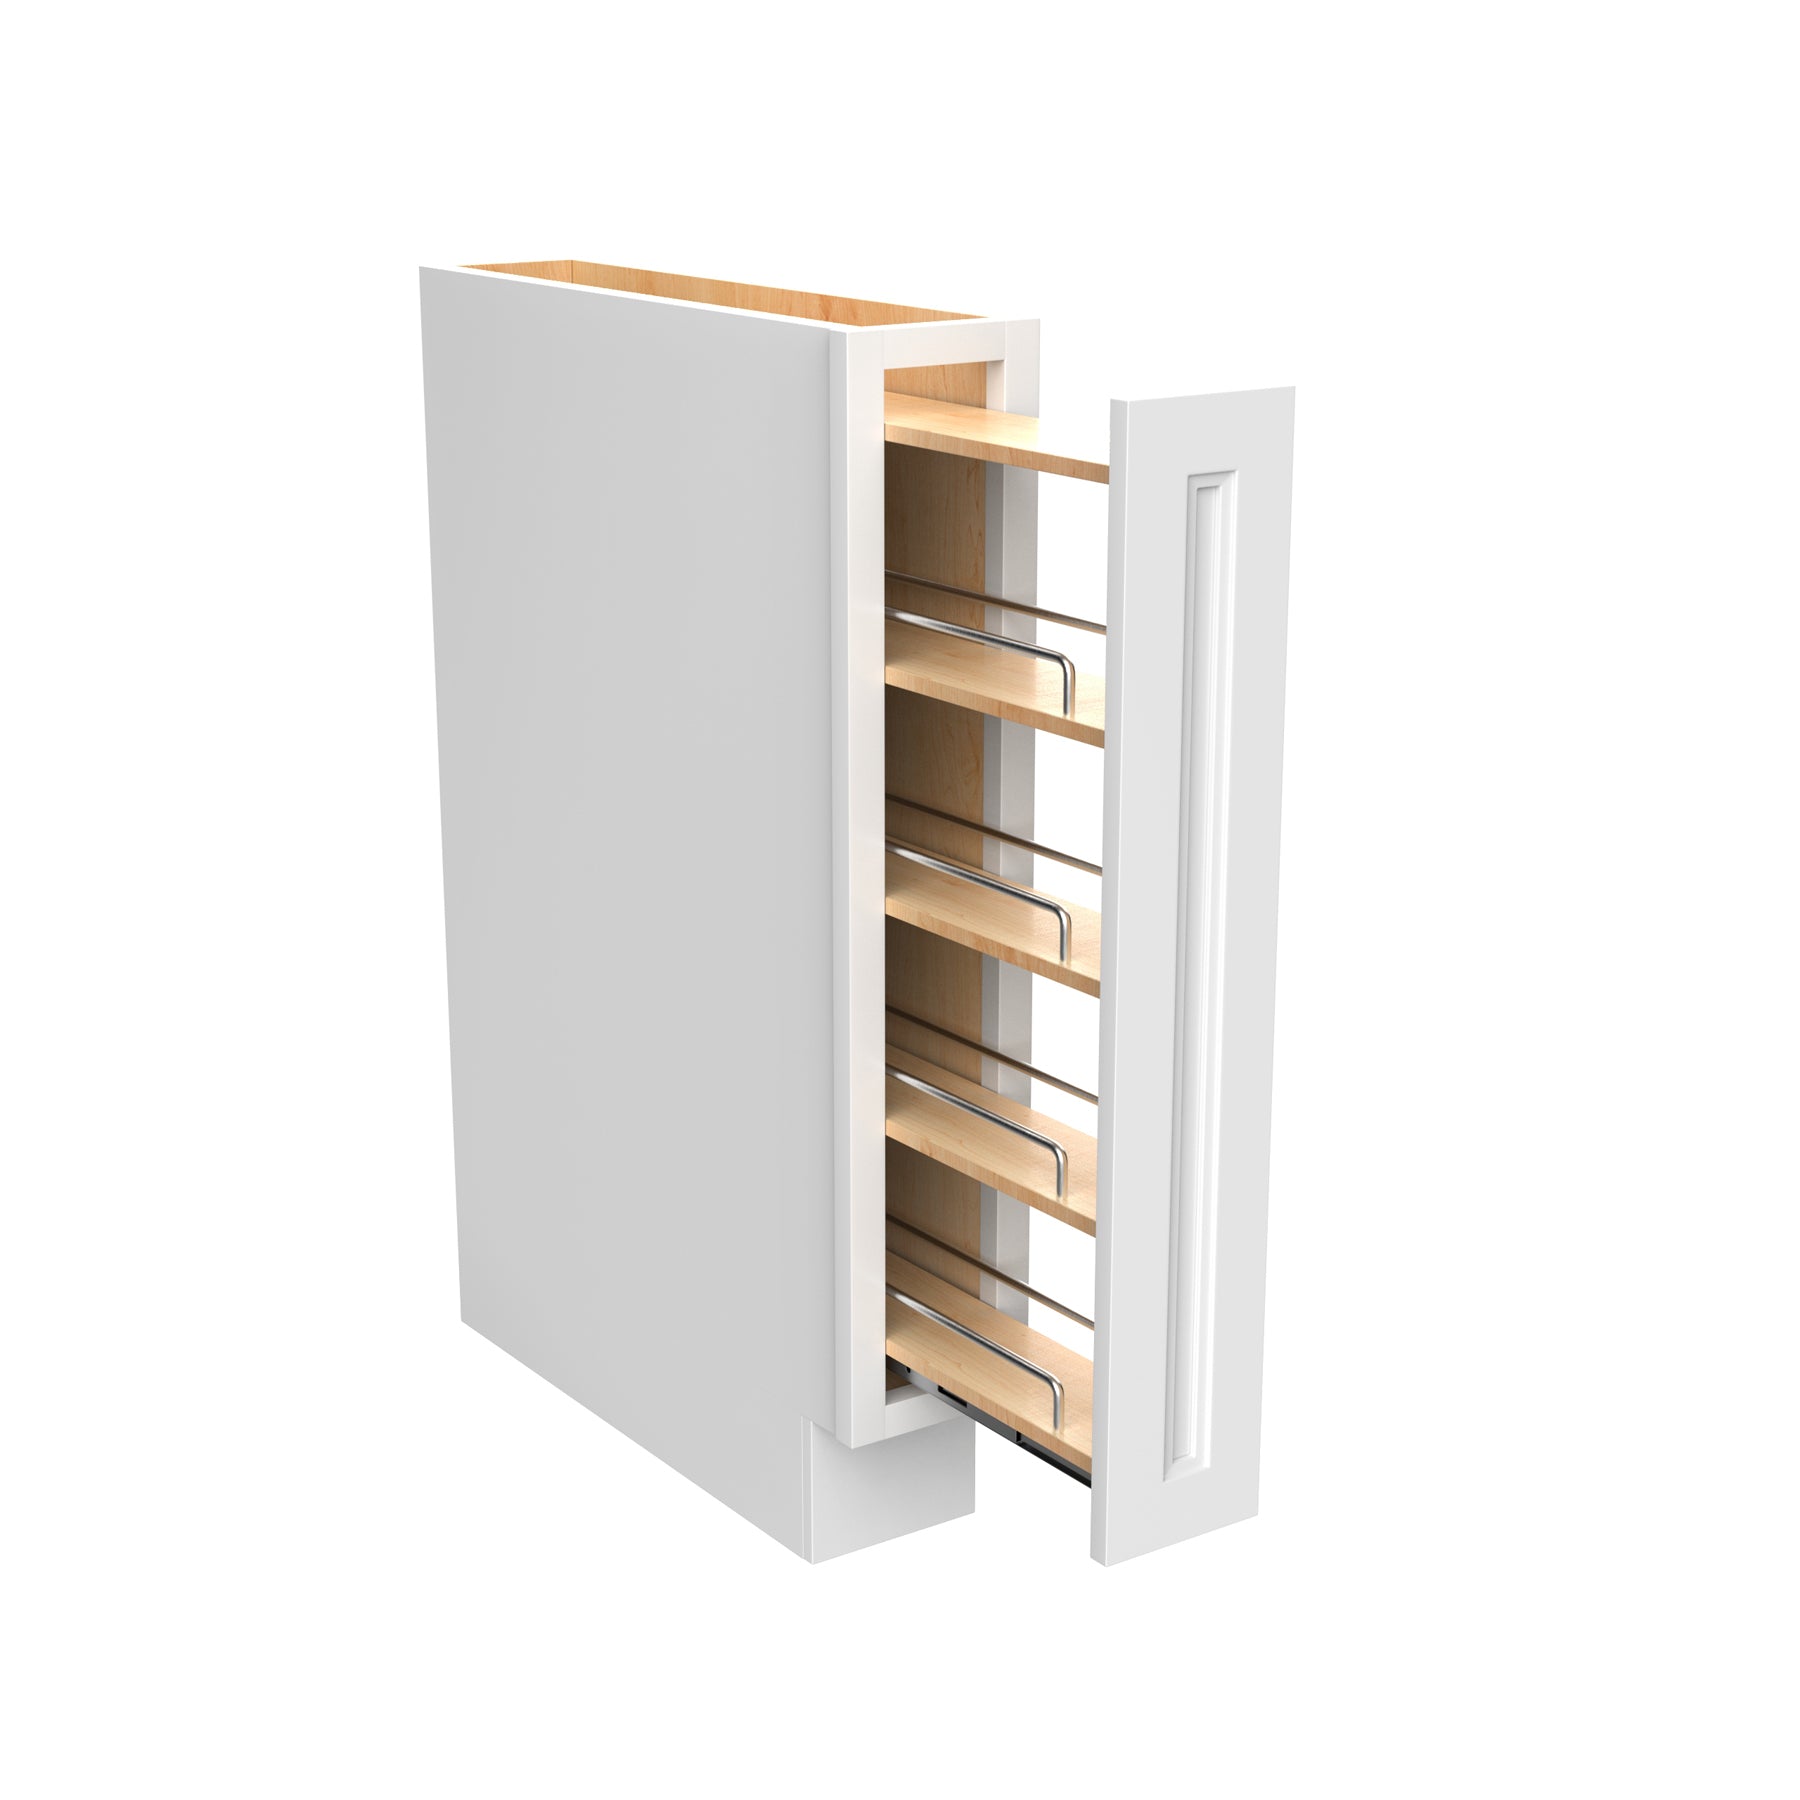 Base Pull-out with Adjustable Shelves with Spice Rack 